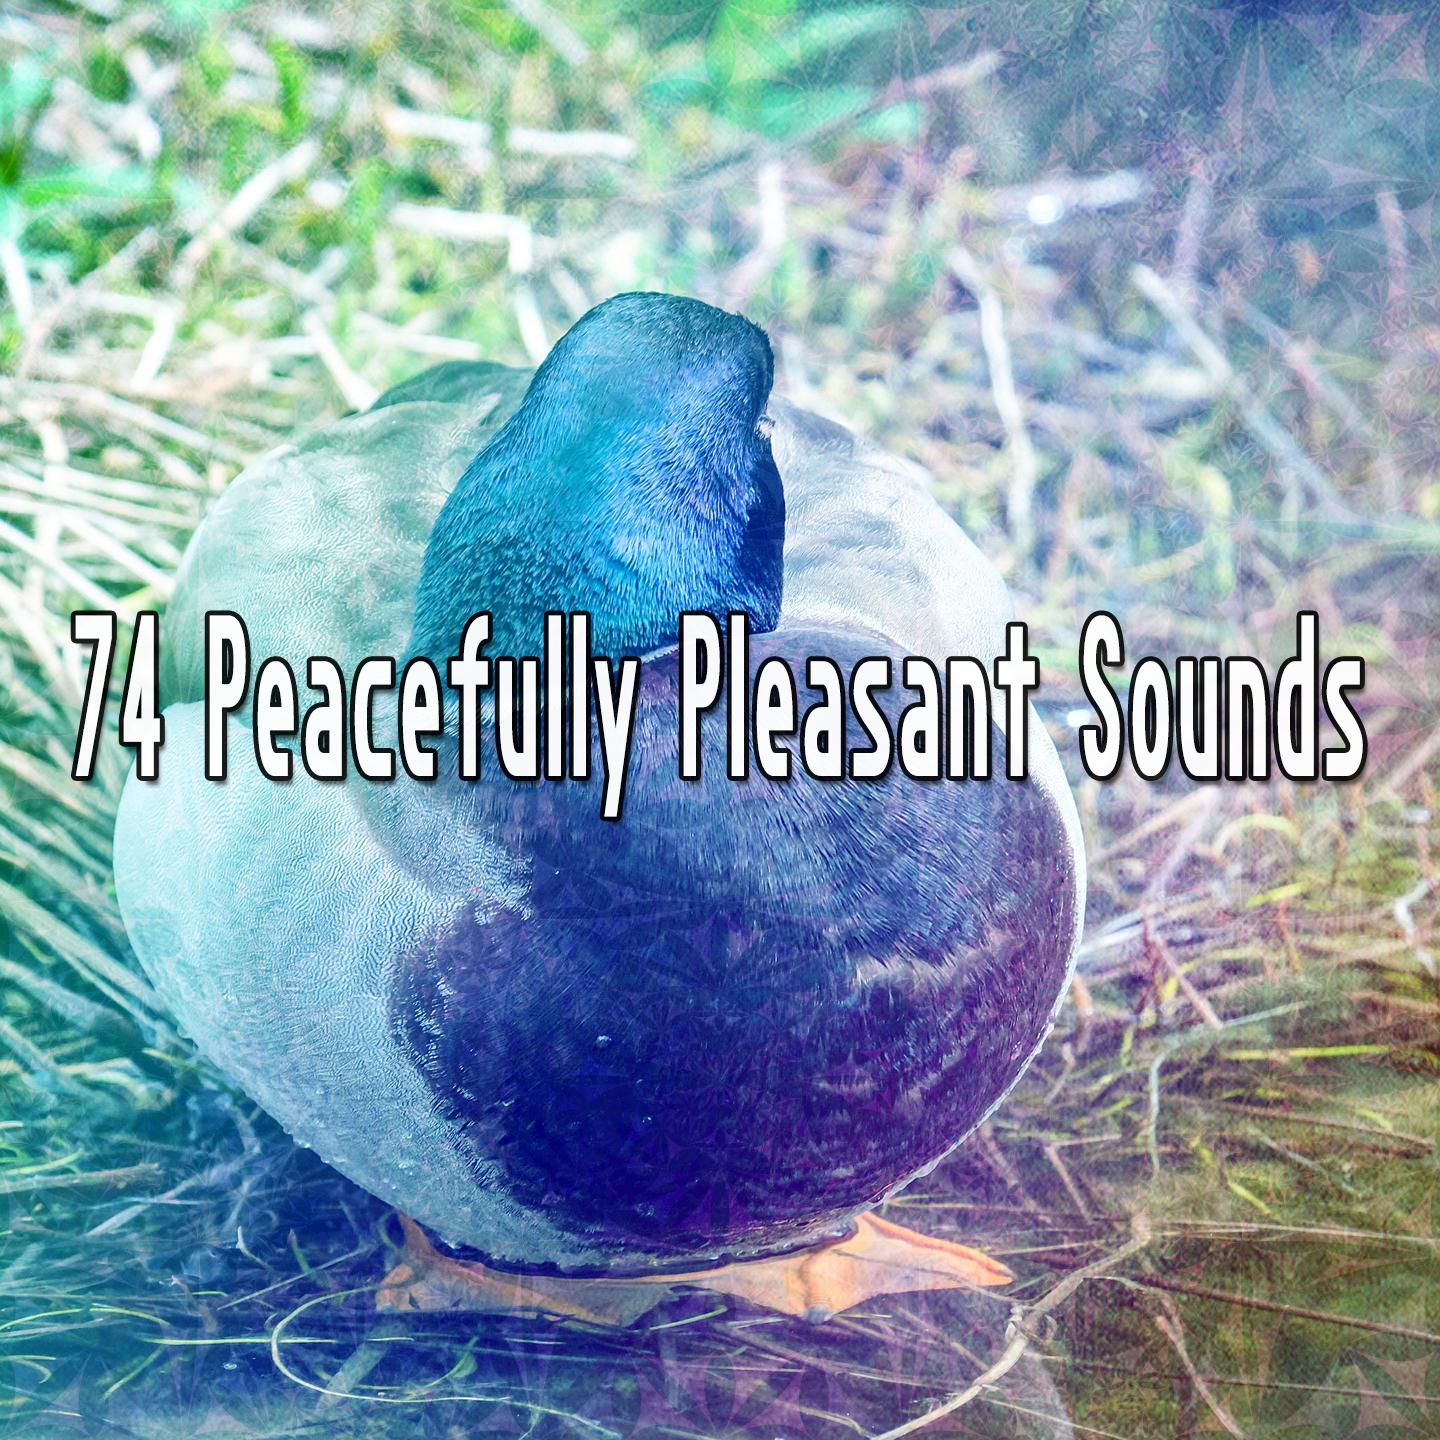 74 Peacefully Pleasant Sounds